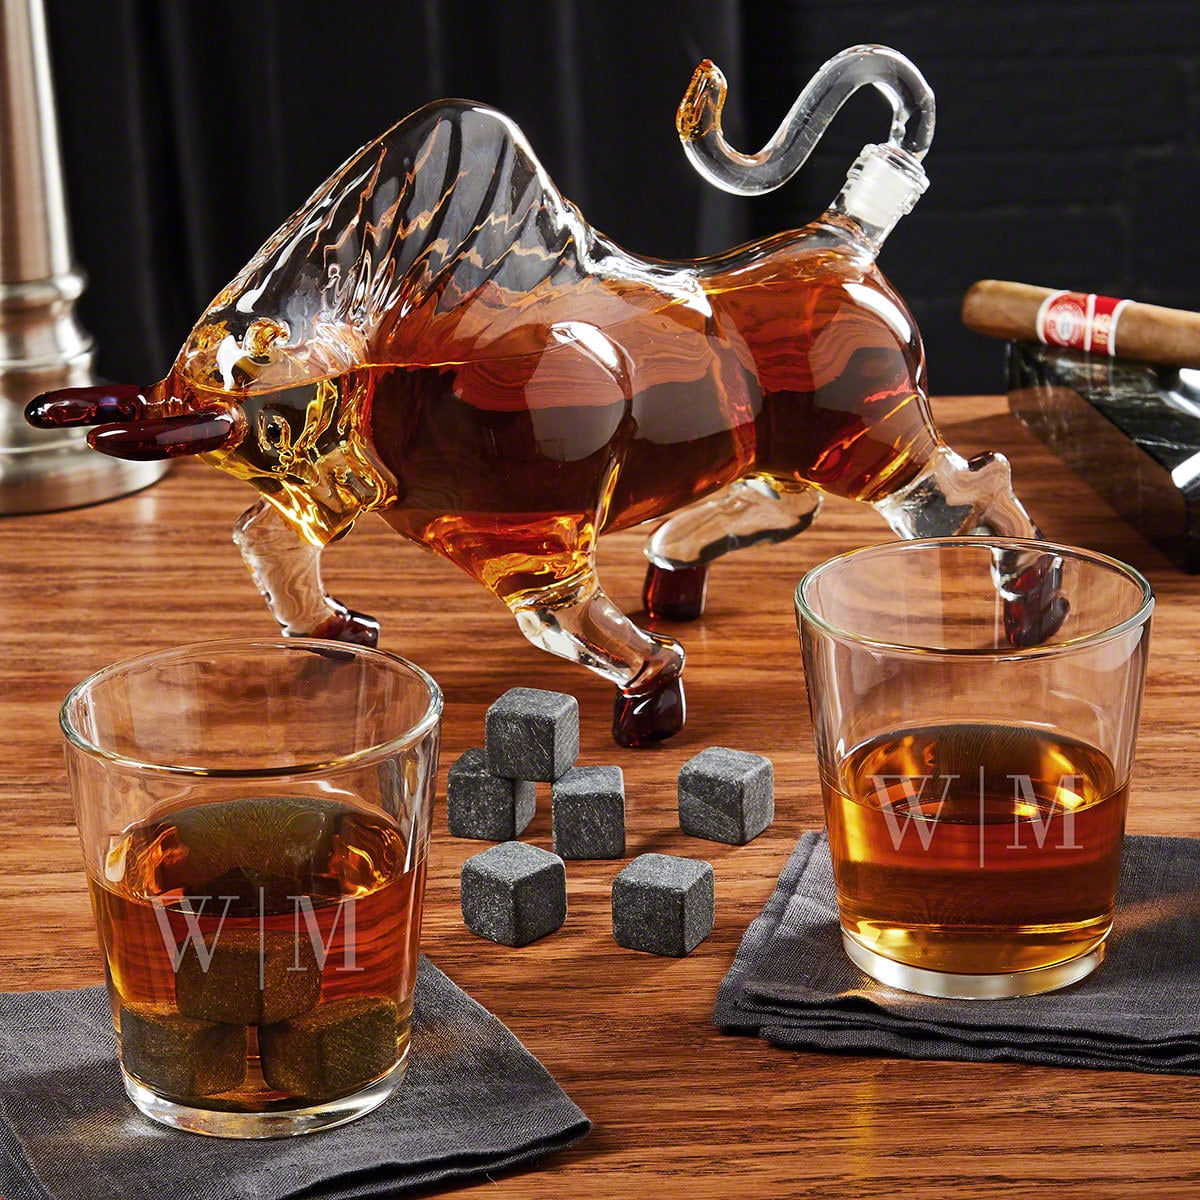 Engraved Bull Whiskey Decanter with Whiskey Glasses - 6pc for Whiskey Bourbon Scotch Lovers - Home Wet Bar